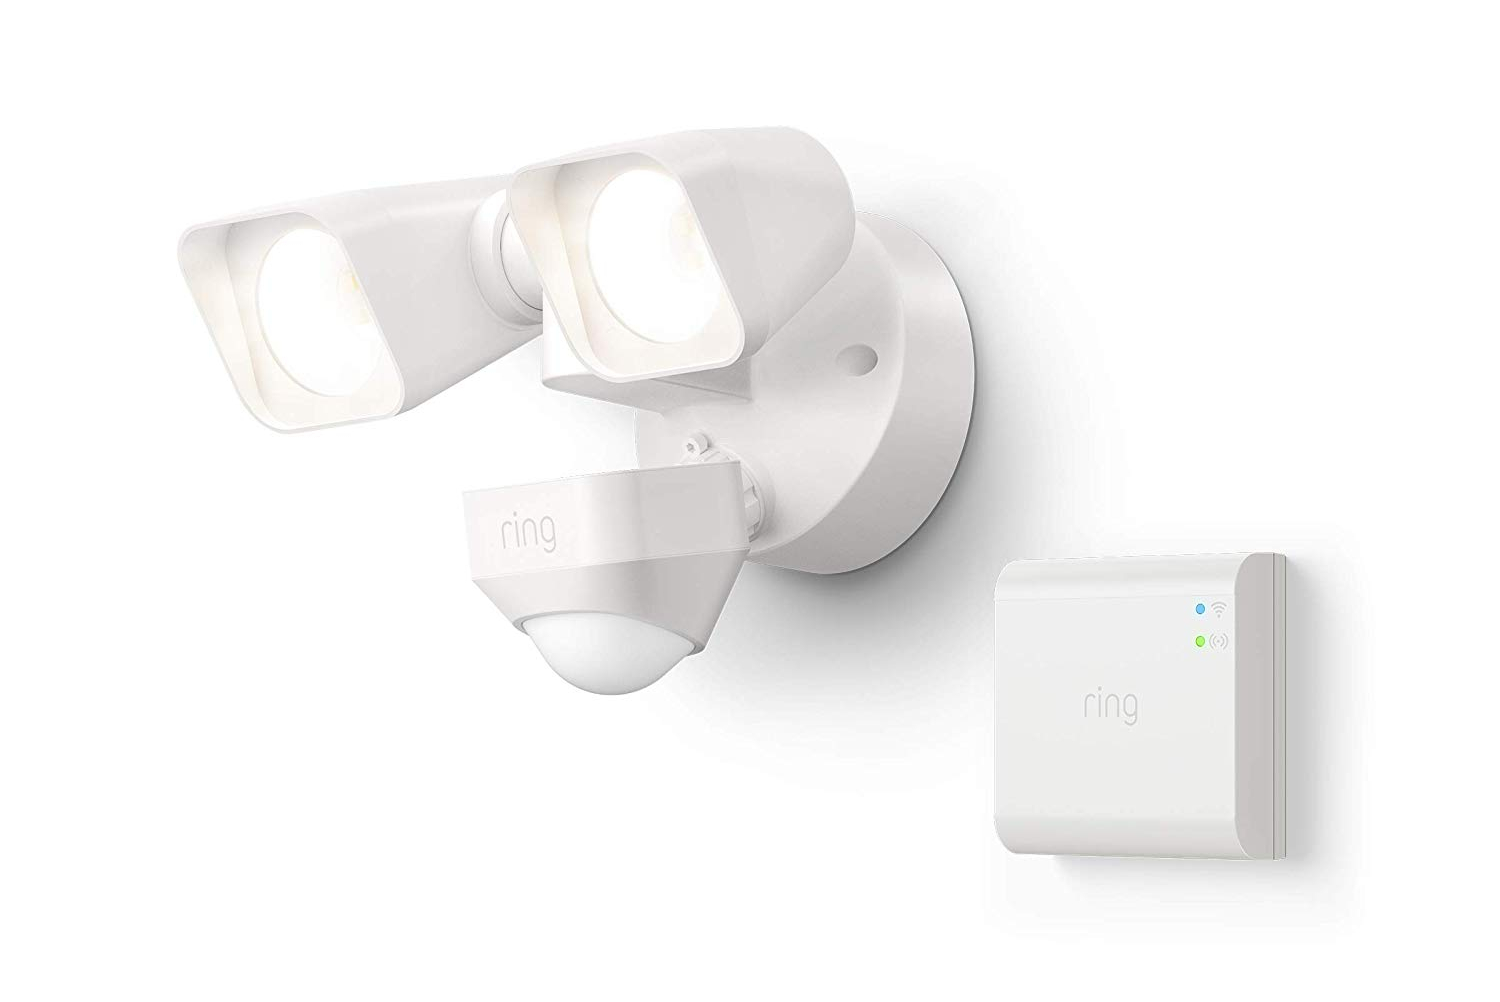 amazon drops pre prime day prices on ring smart lighting floodlights  floodlight wired white 1